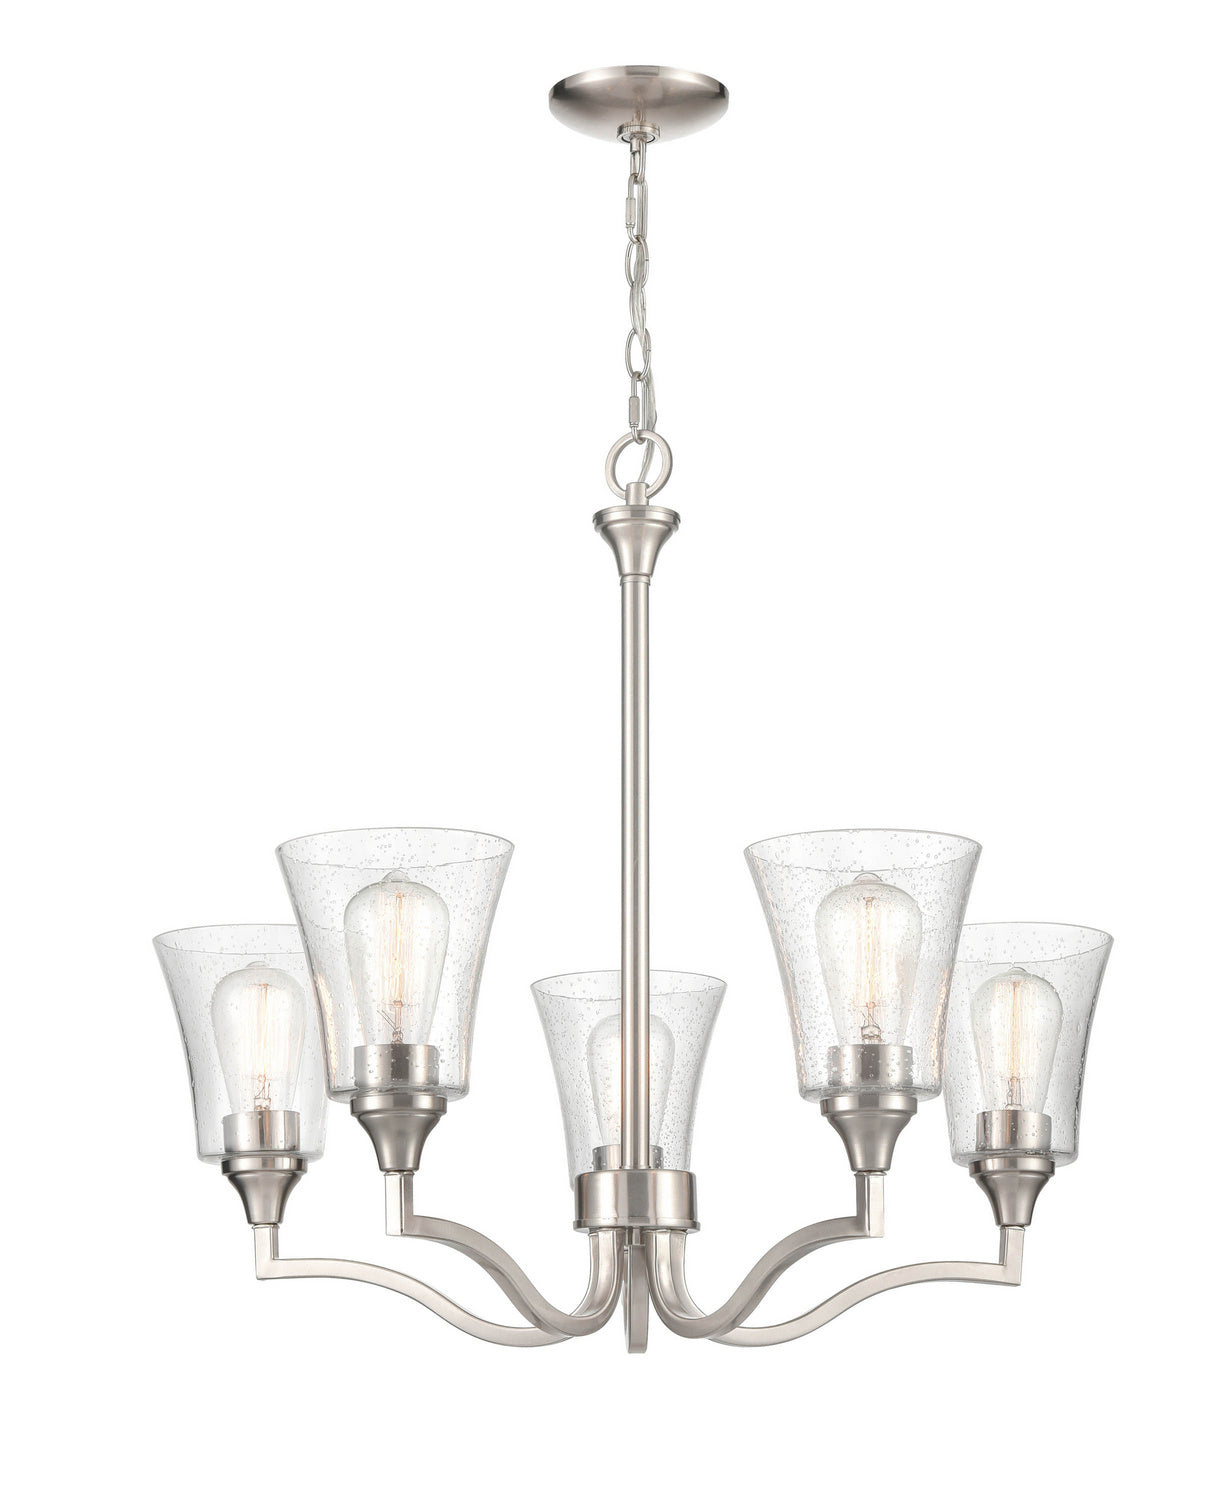 Millennium Caily 2115-BN Chandelier Light - Brushed Nickel